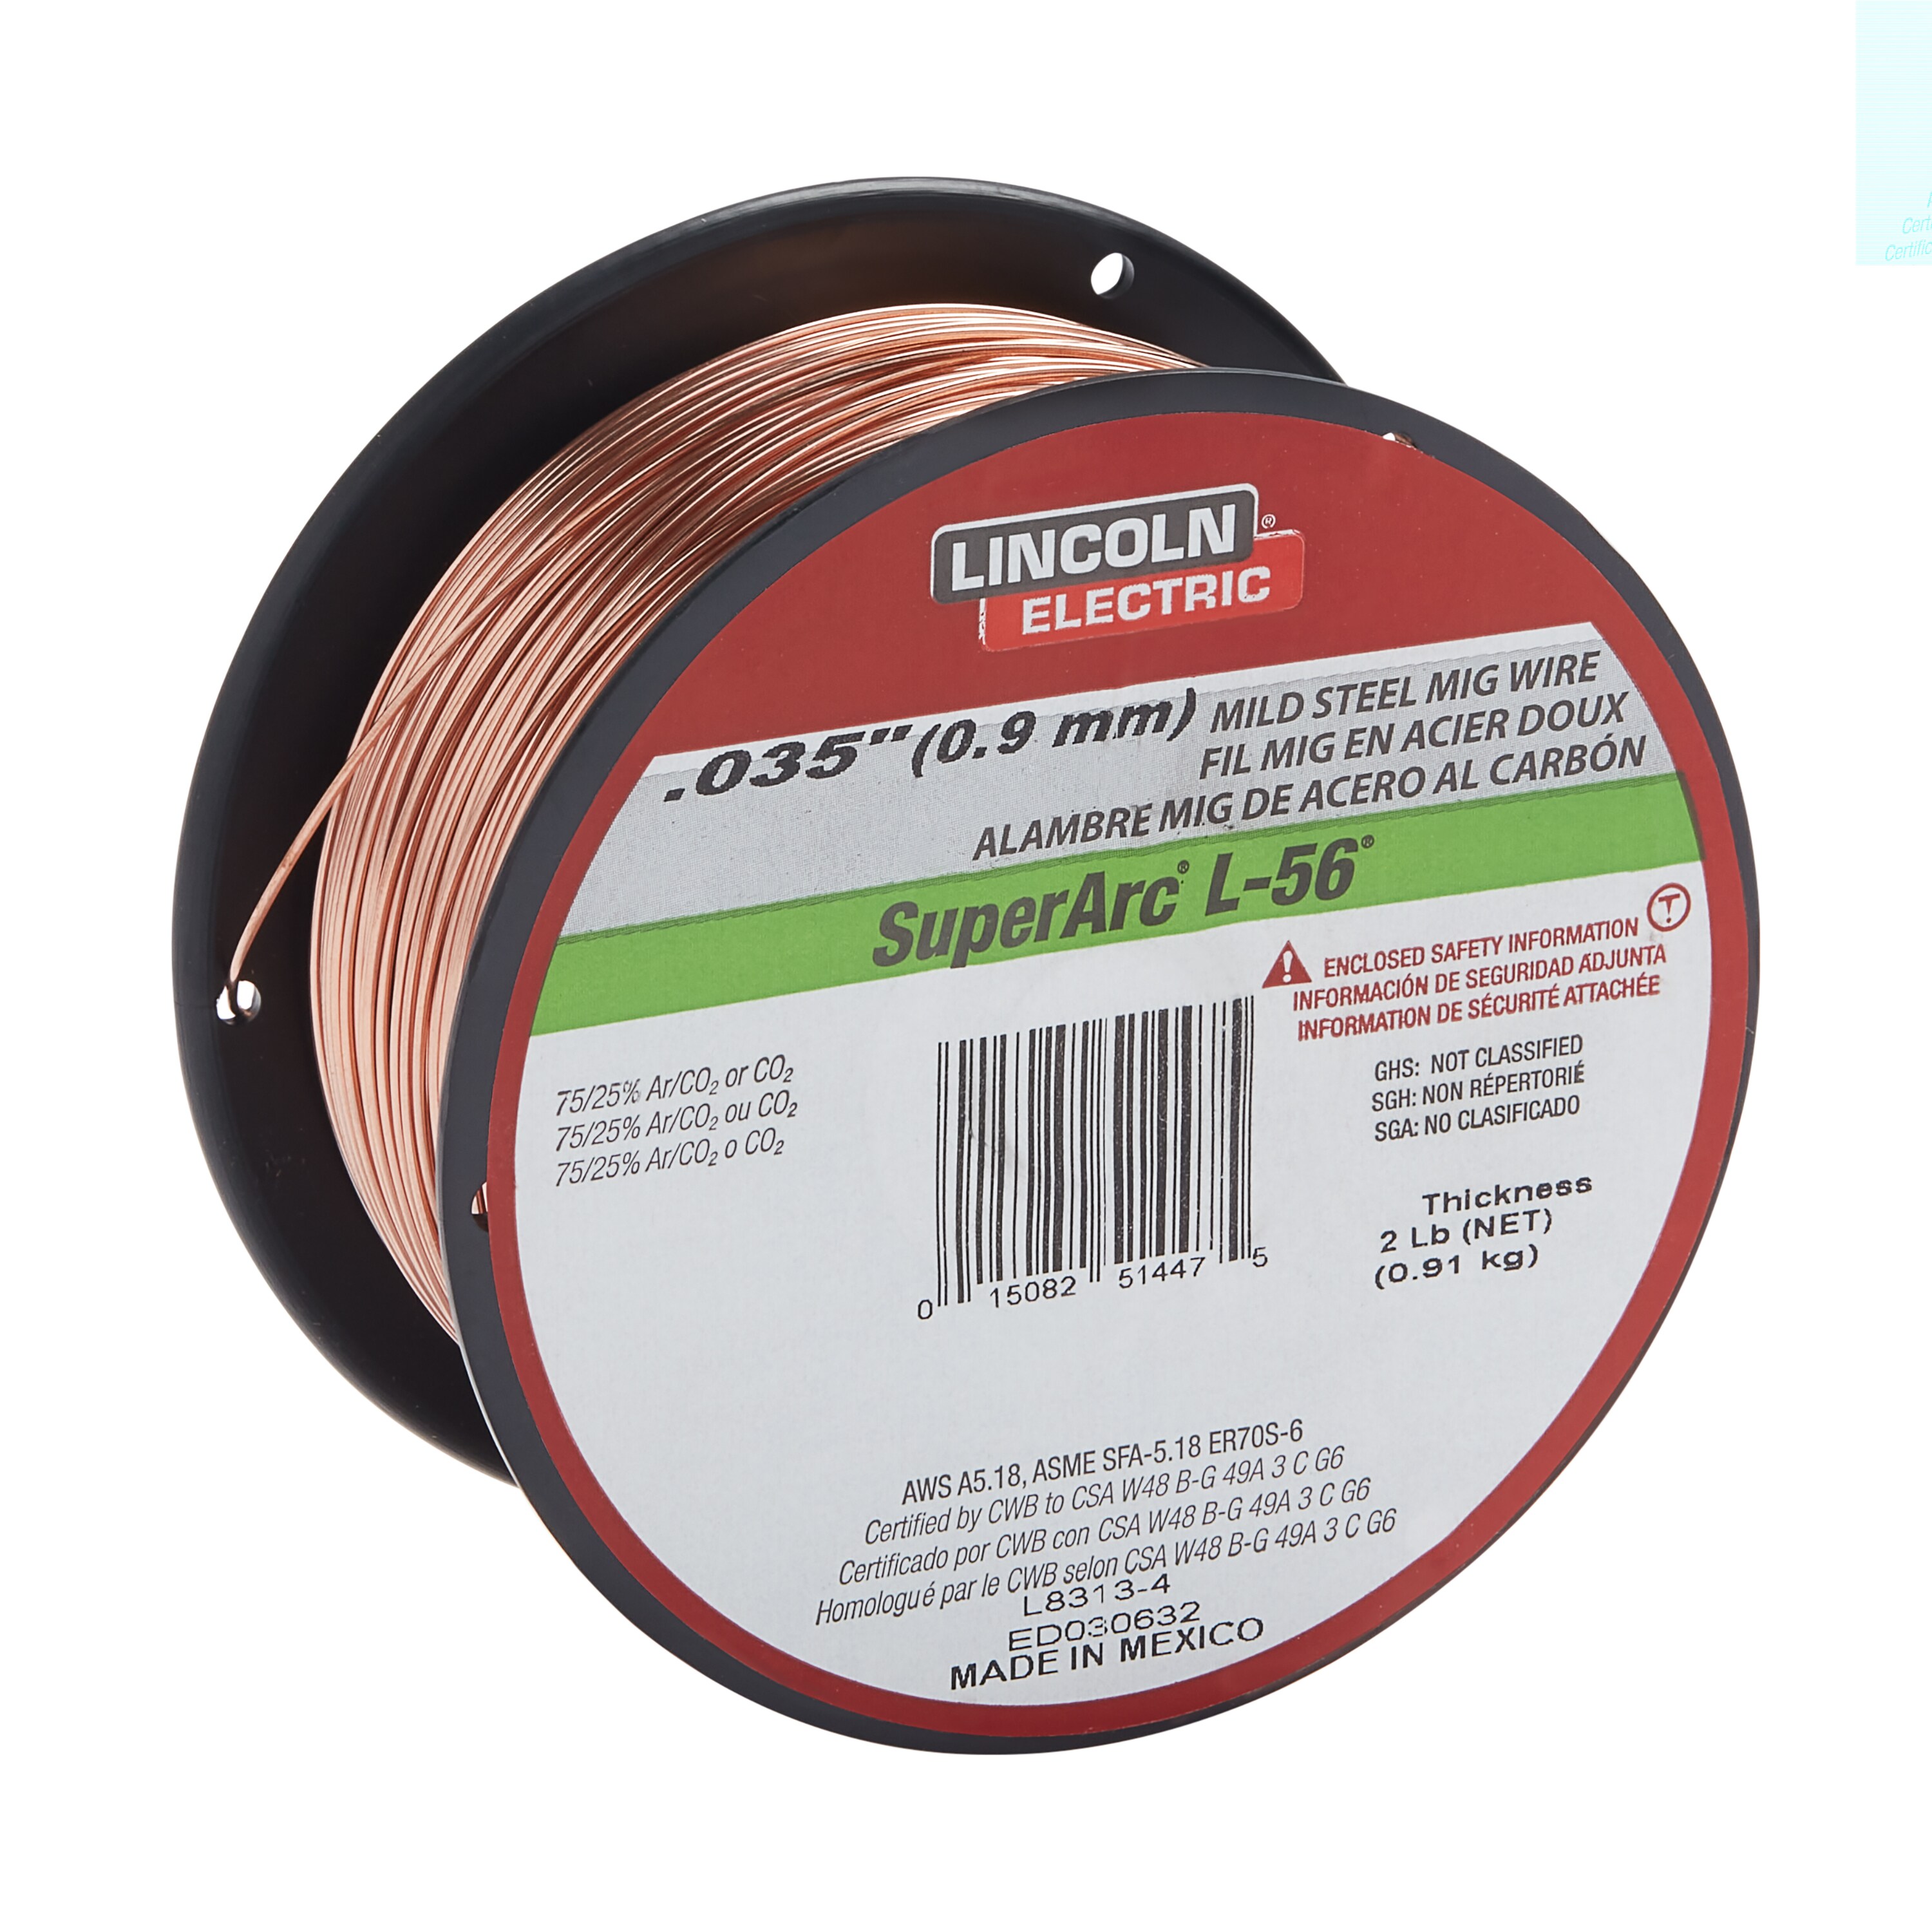 Model Number ED029042 Lincoln Electric SuperArc L-56 MIG Welding Wire Spool 12 1/2-Lb Mild Steel Copper Coated.045in 